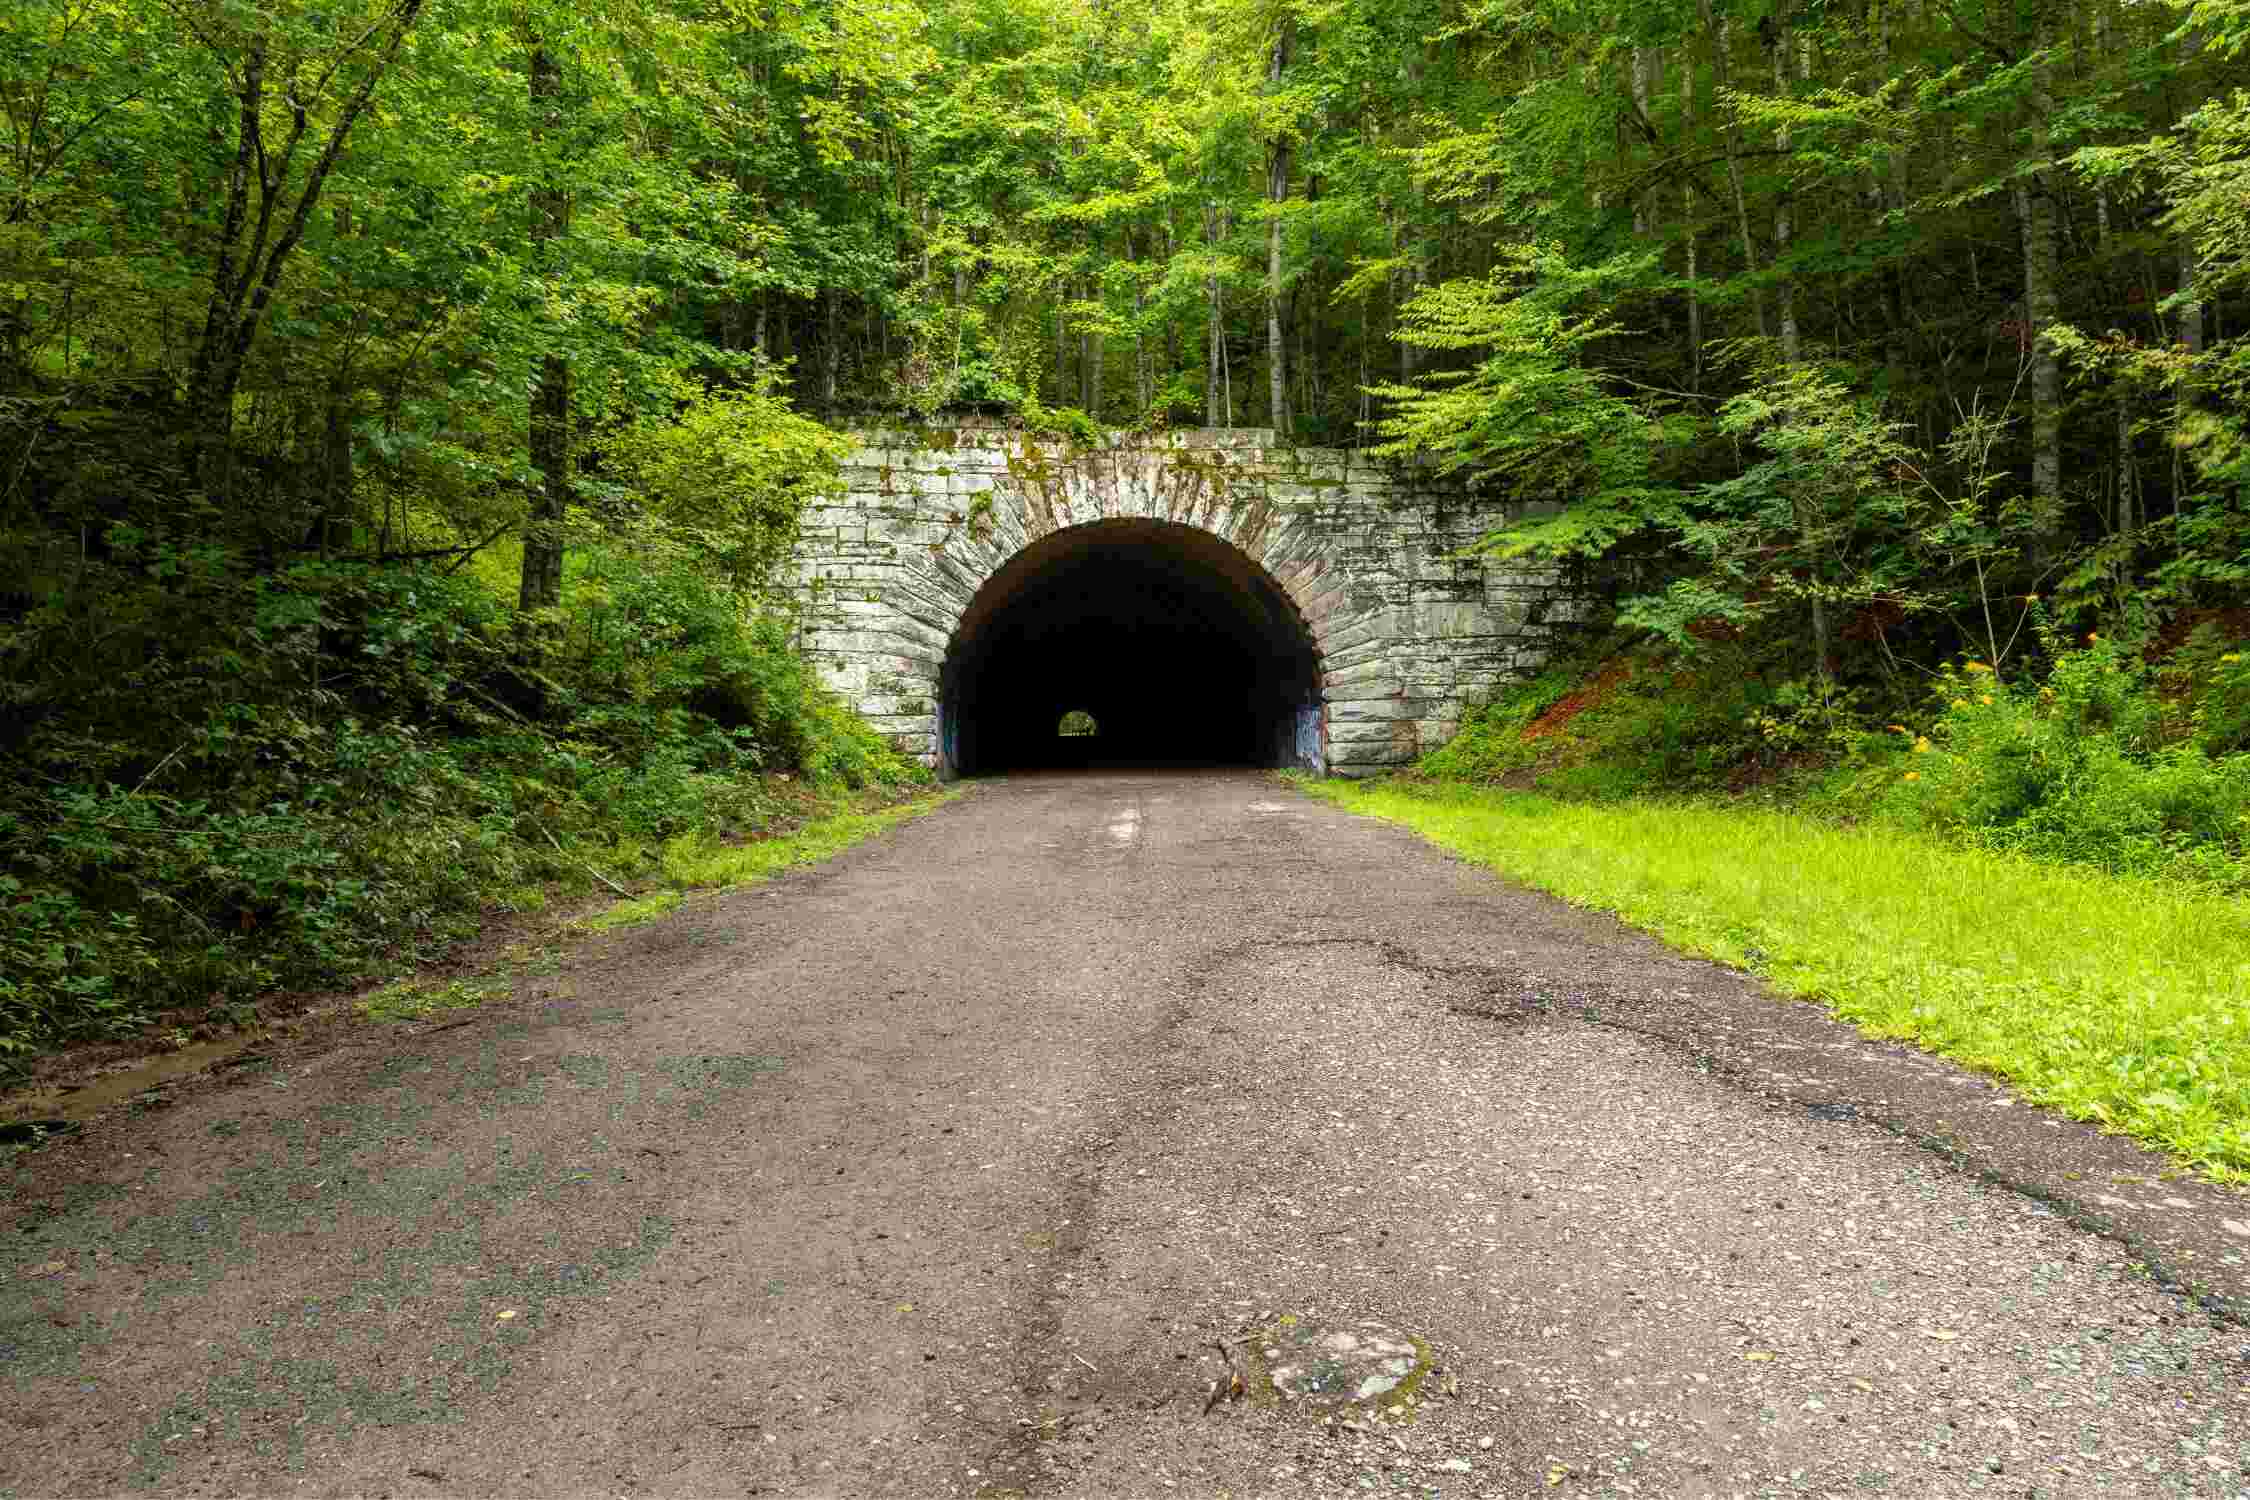 Tunnel on the Road to Nowhere